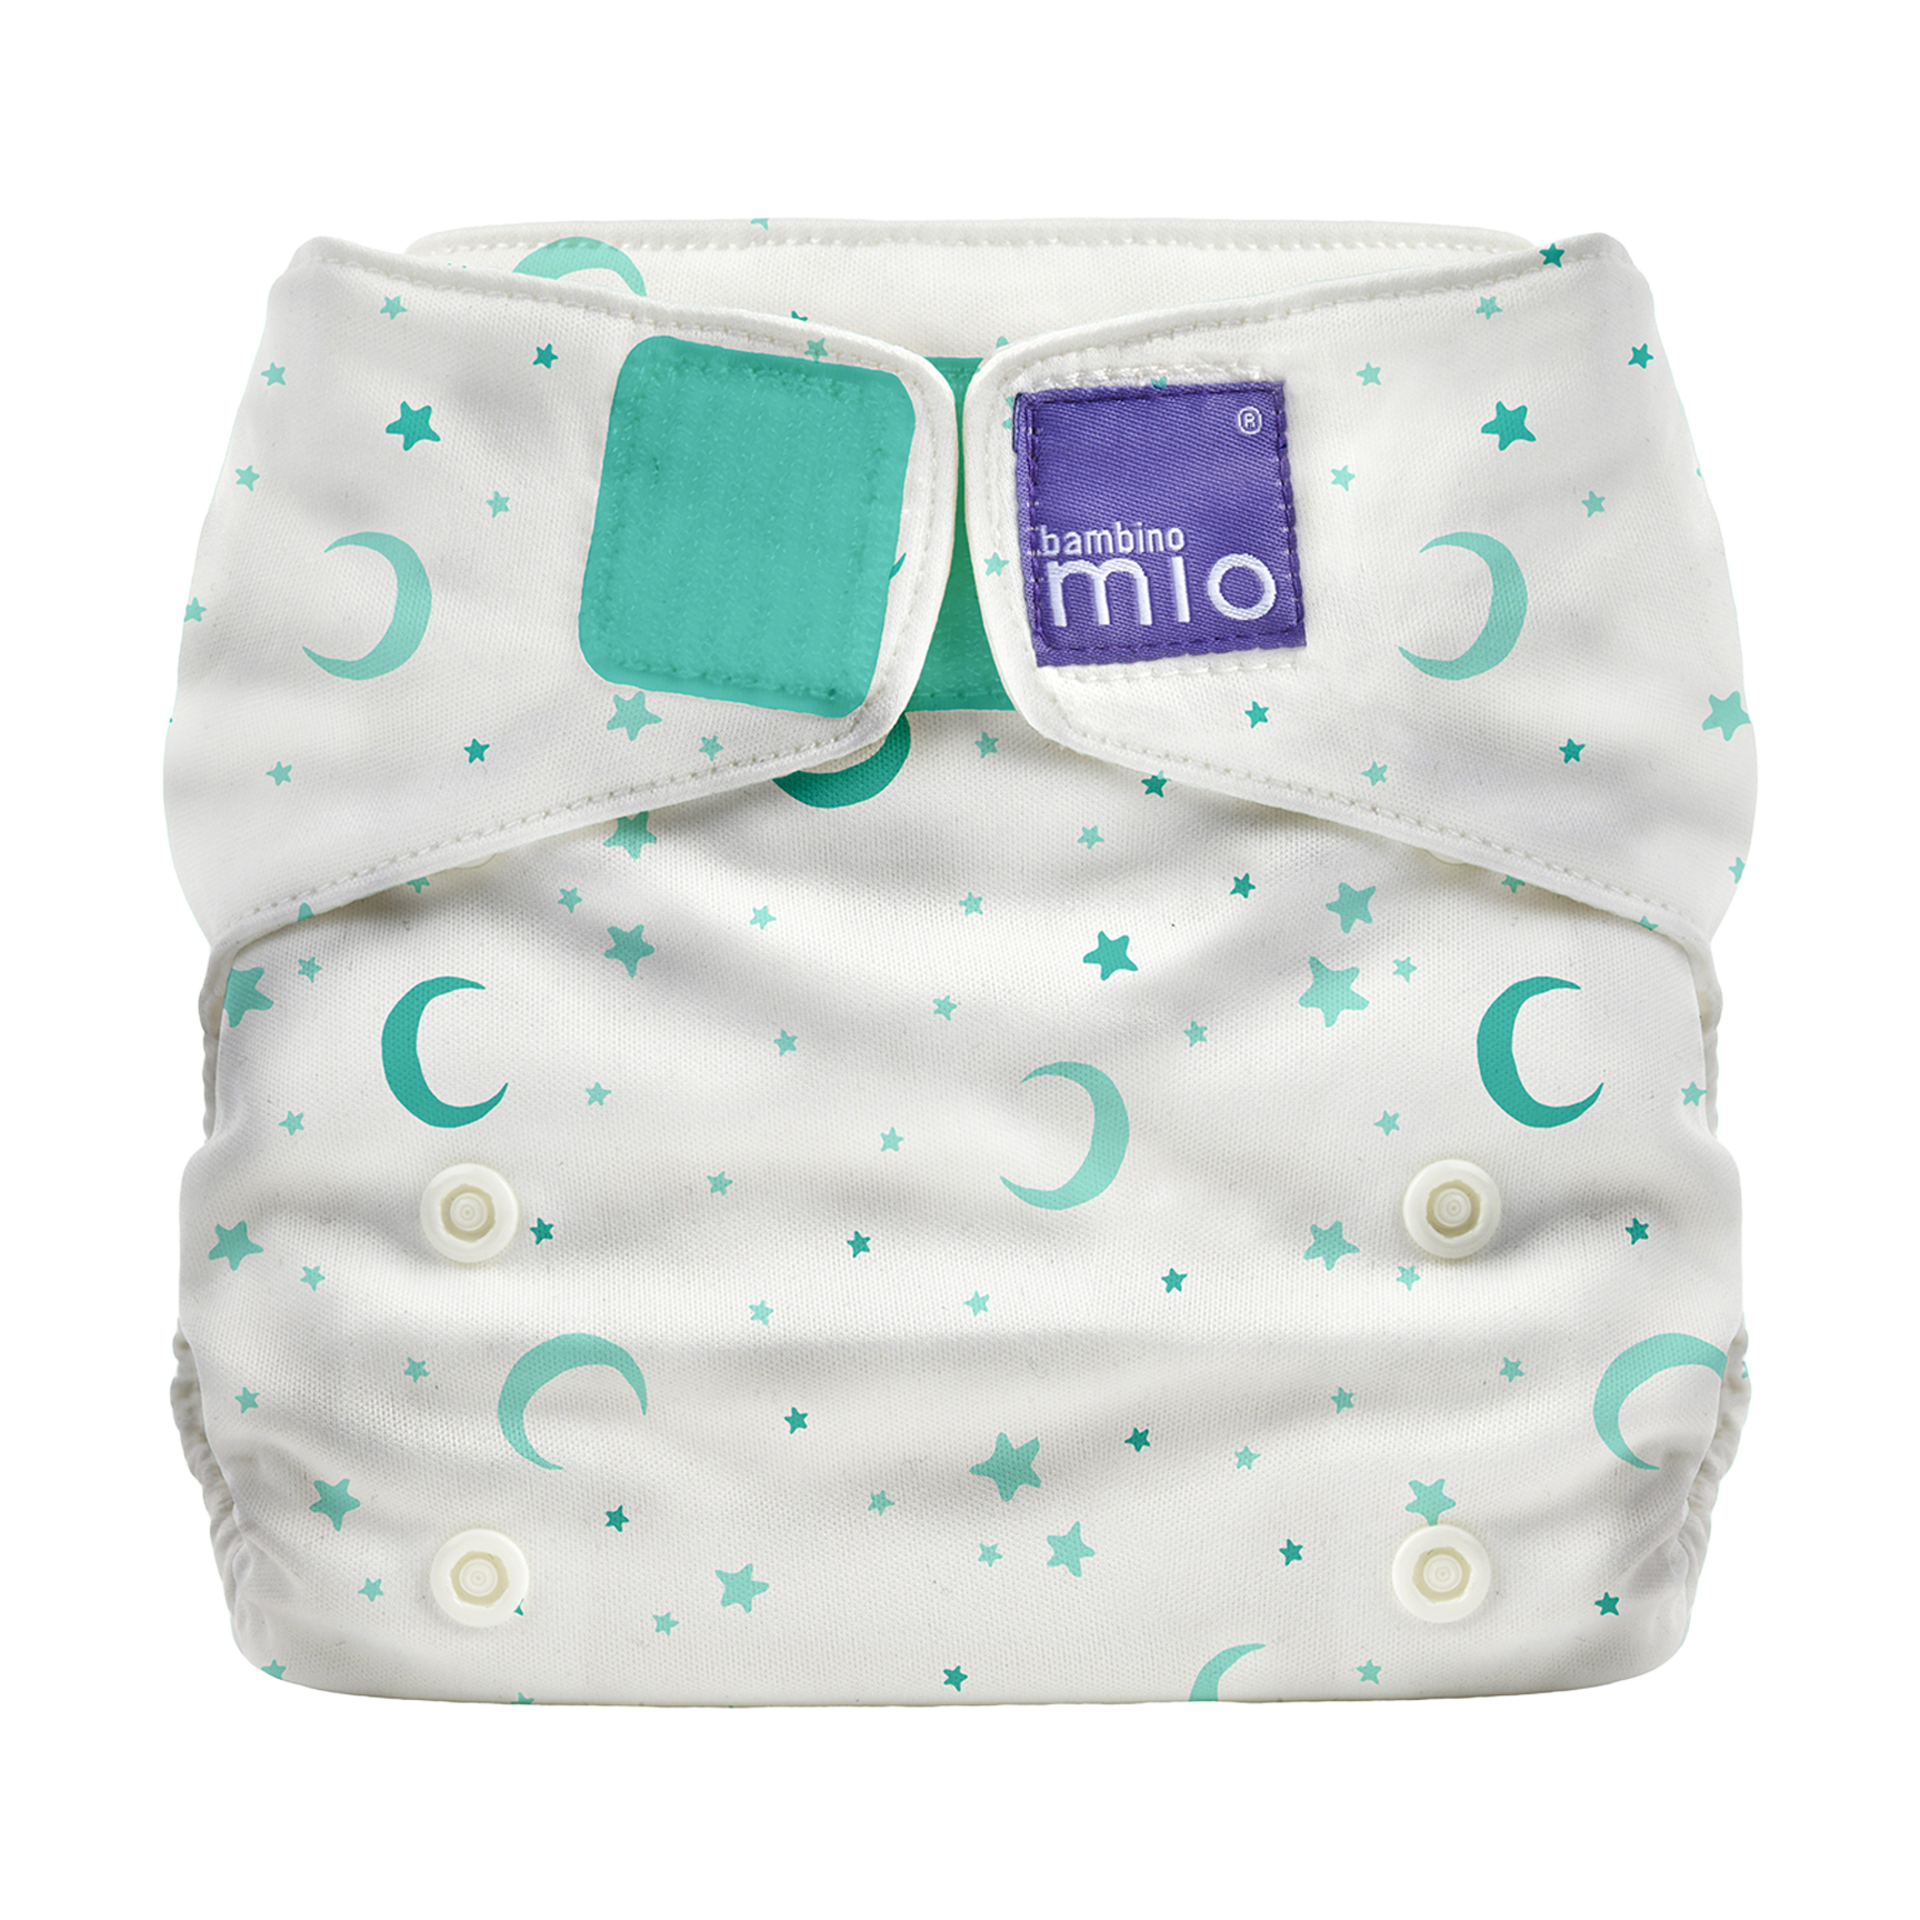 non disposable diapers for babies